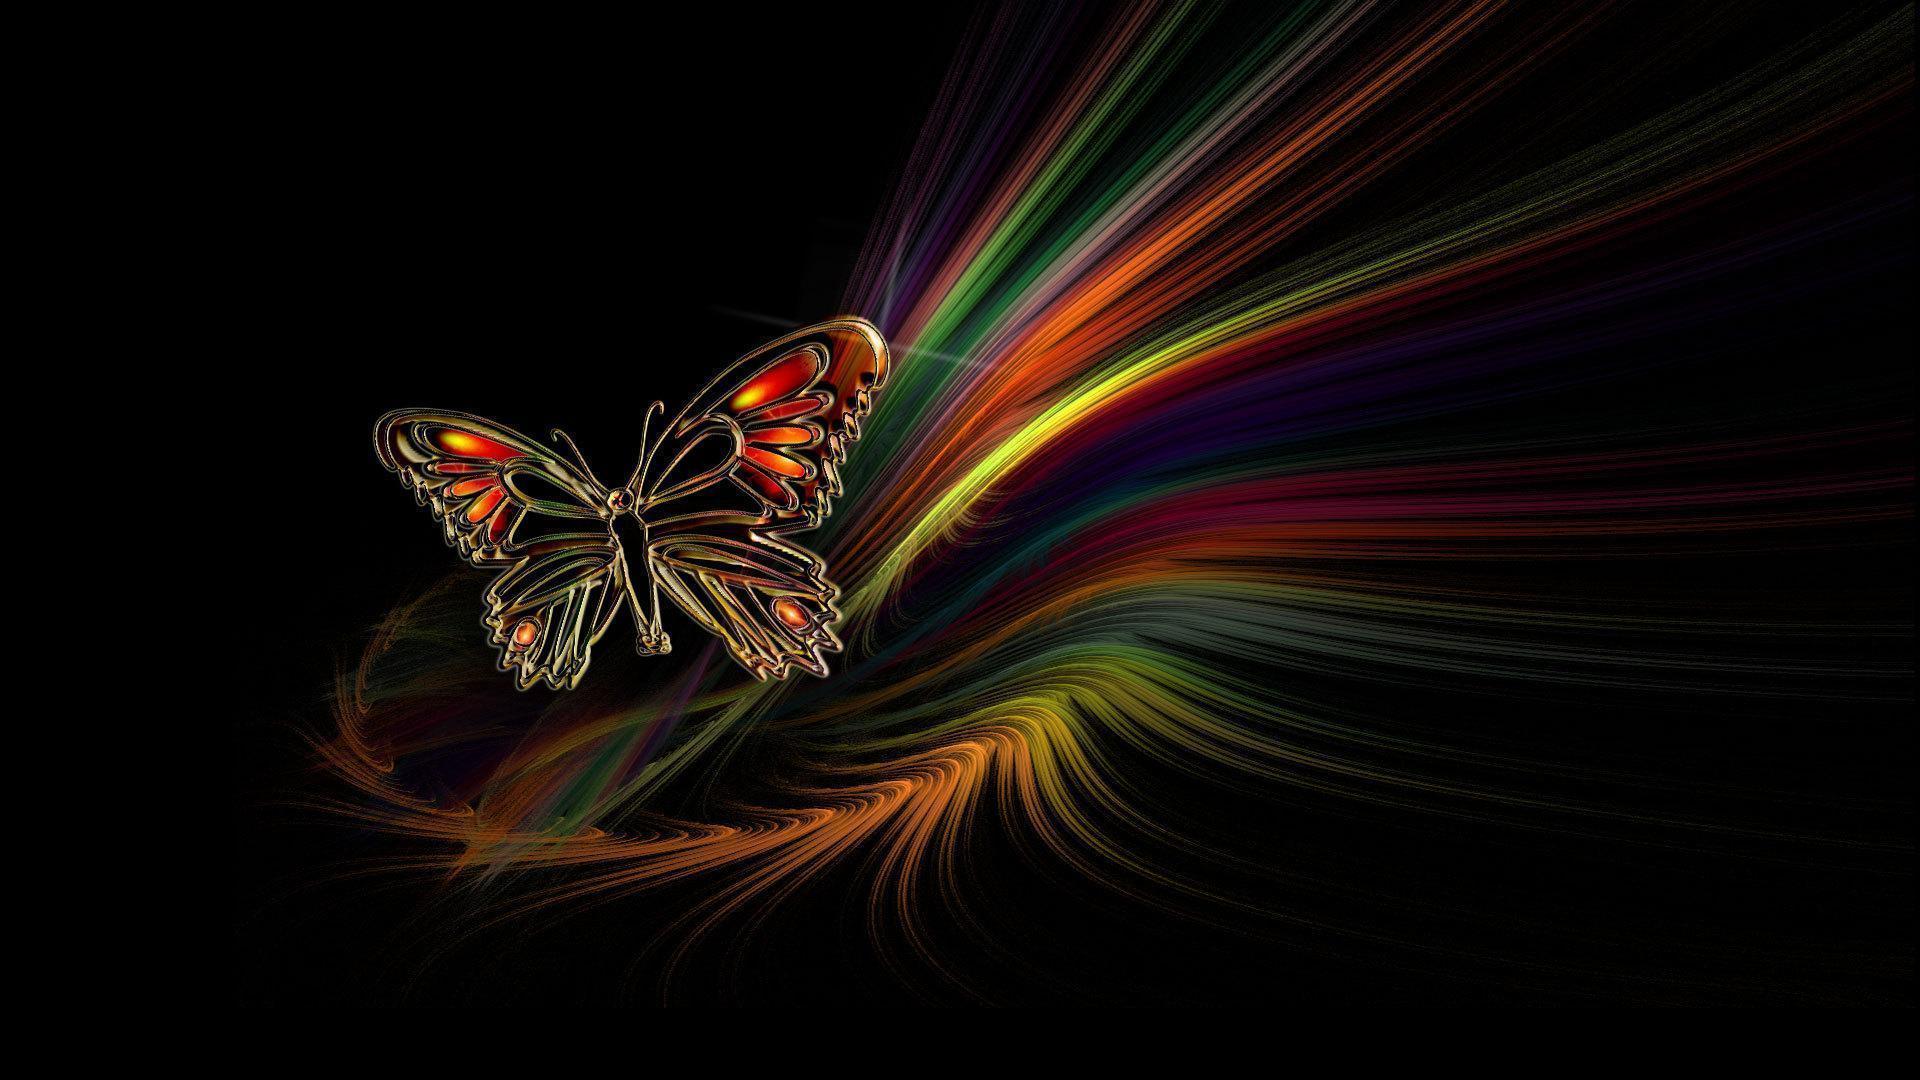 Butterfly 3D Abstract Wallpaper. Download High Quality Resolution